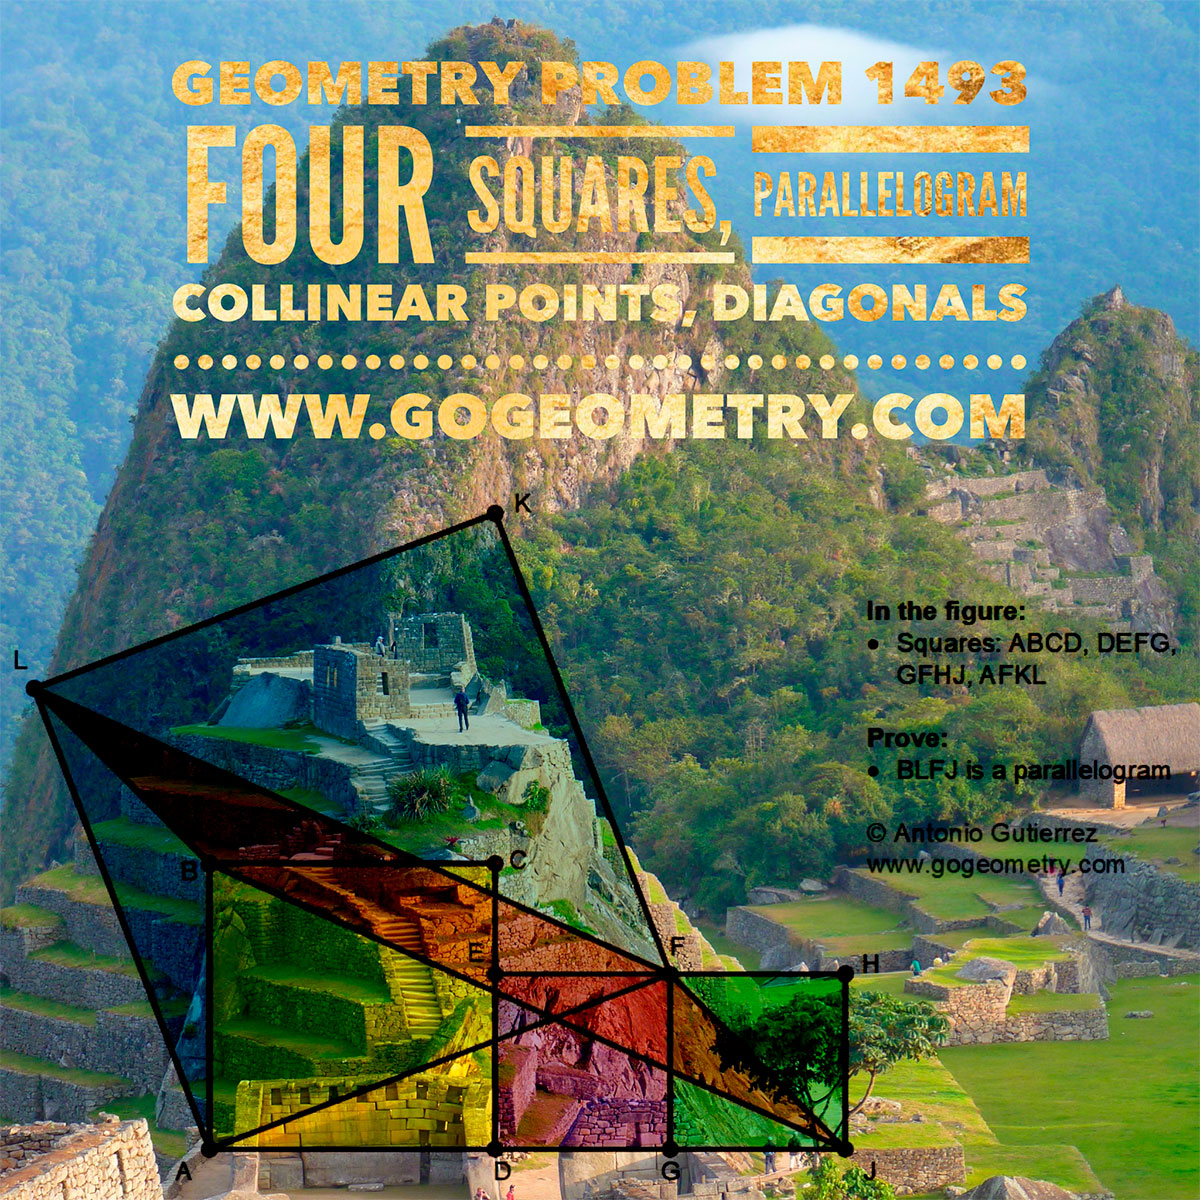 Geometry Problem 1493: Four Squares, Parallelogram, Auxiliary Lines, Machu Picchu in the background